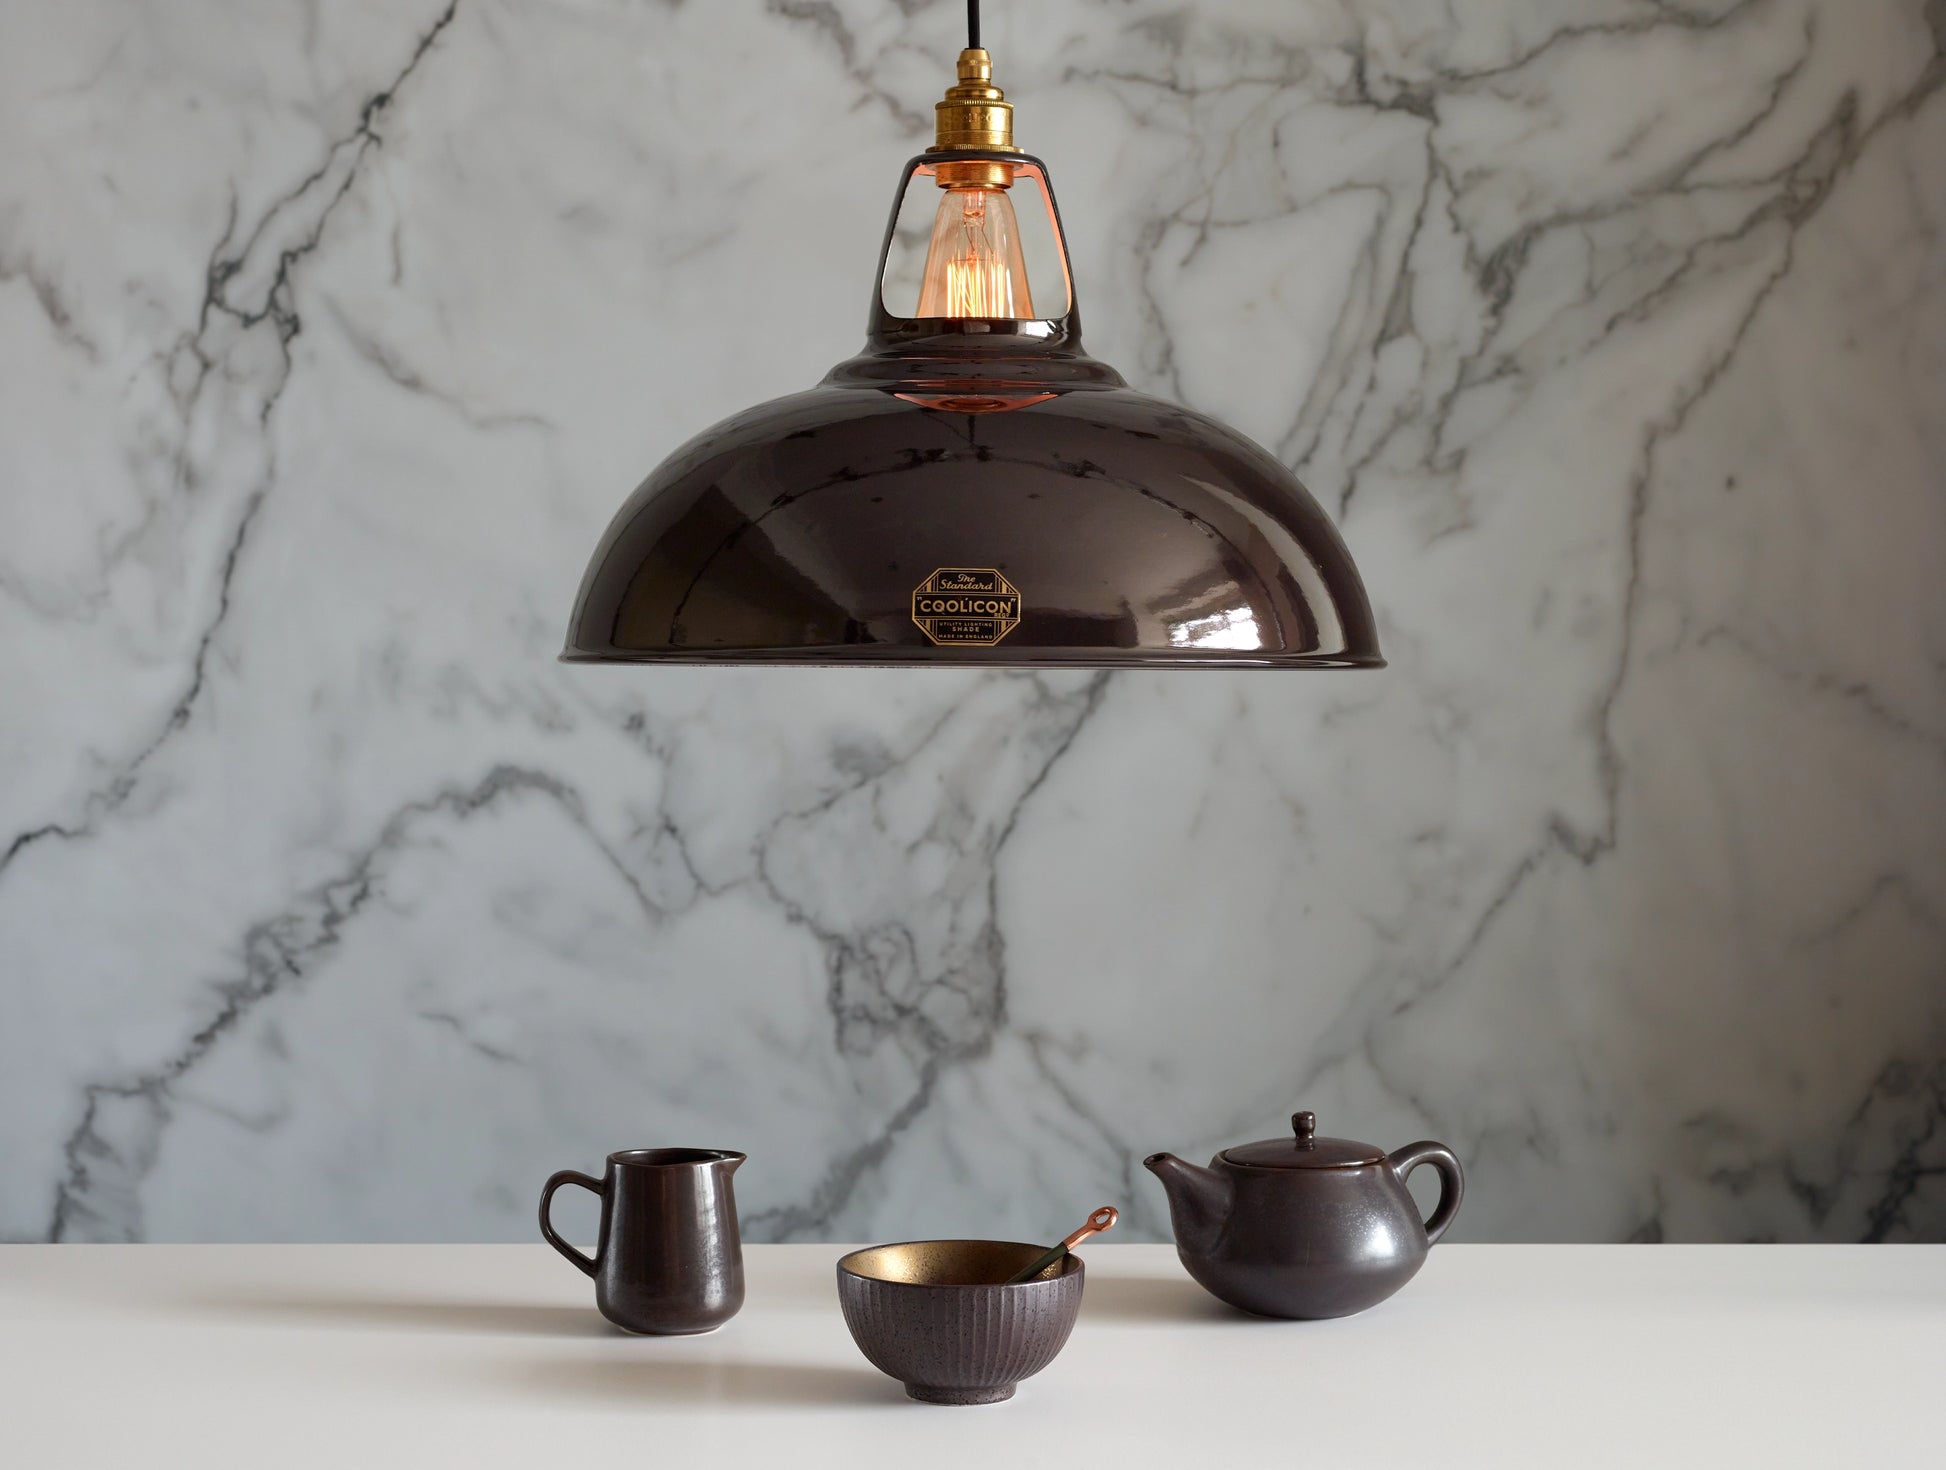 A Large Coolicon Pewter grey lampshade with a Signature Brass pendant set hanging above a table with a matching set of dark tea accessories. There is a milk jug, a matcha bowl with a copper spoon and a teapot